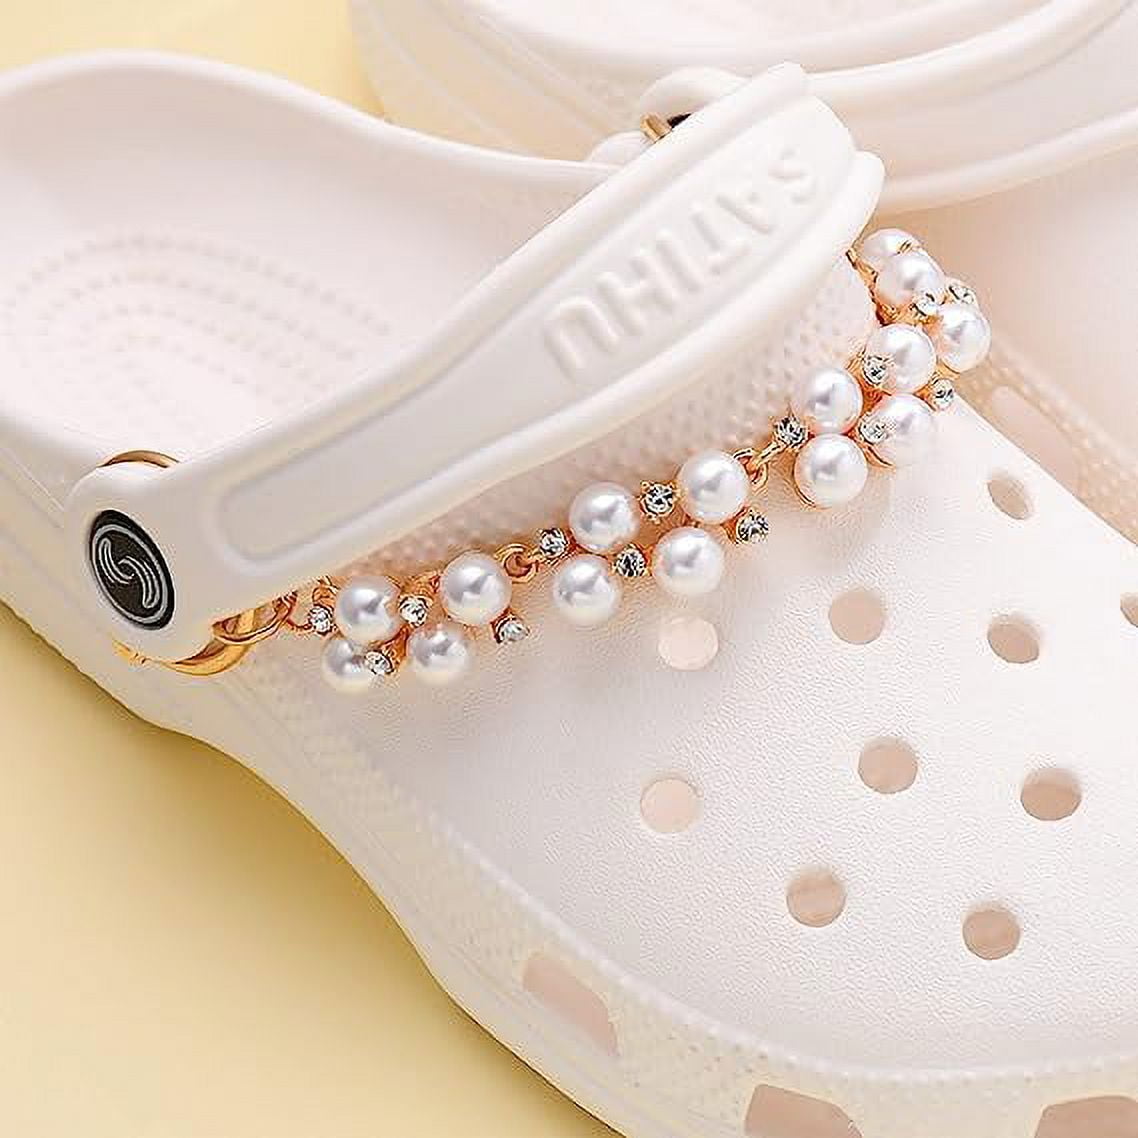 Cute Croc Charms Anklets Flipkart For Teens Fun Clog Accessory For Birthday  Gifts, Parties, And Adults From Henrye, $7.47